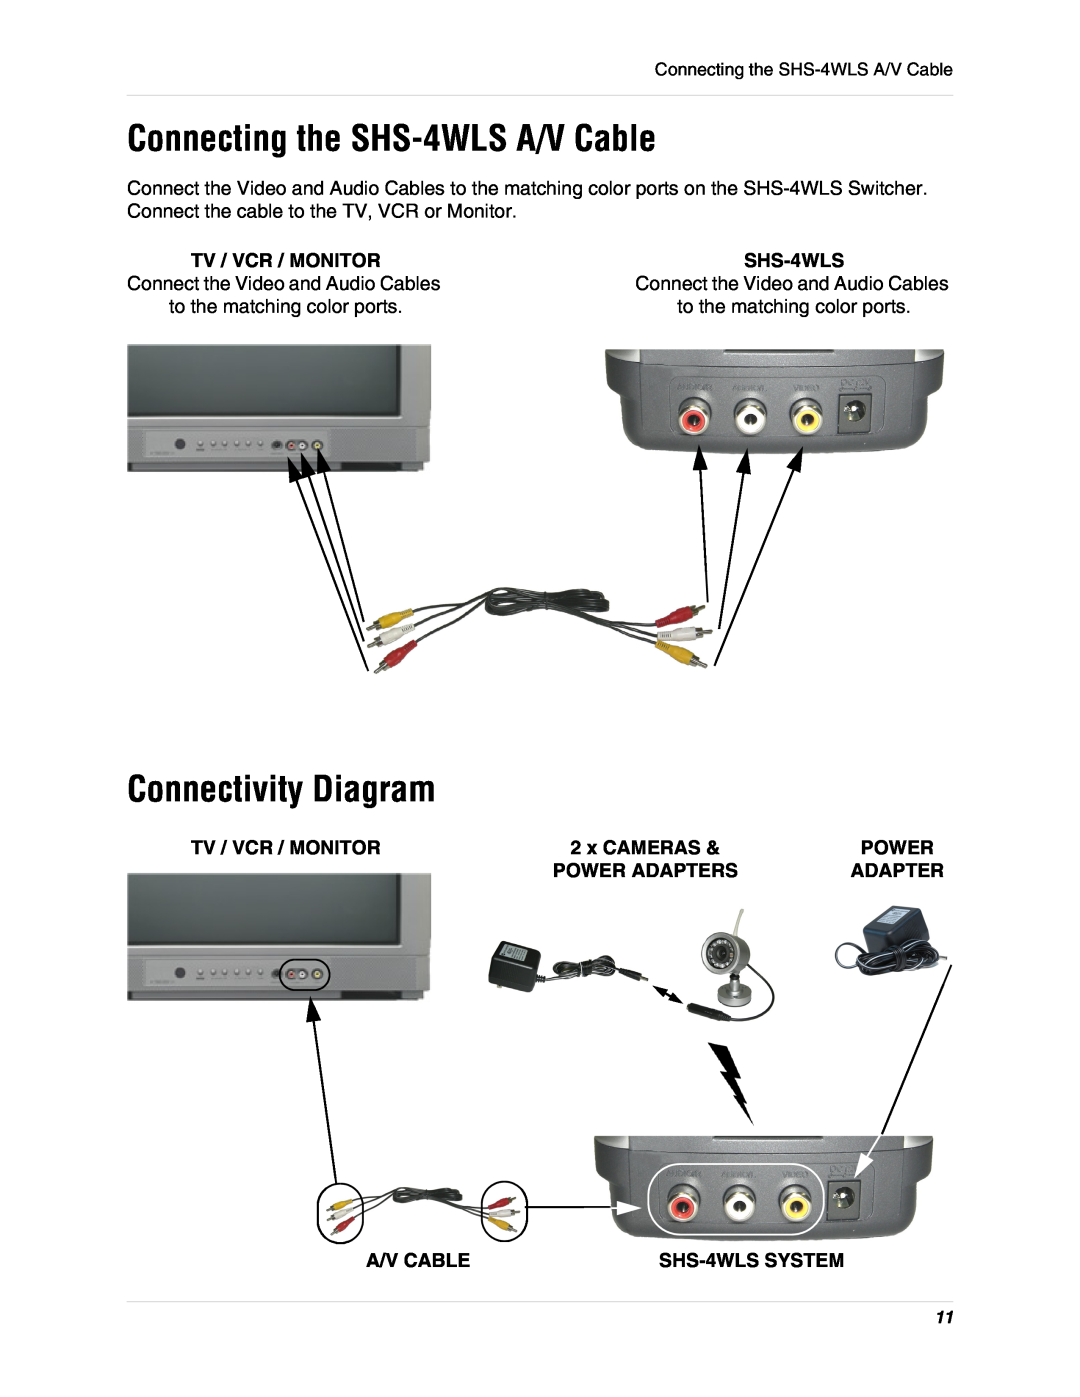 LOREX Technology Connecting the SHS-4WLSA/V Cable, Connectivity Diagram, Tv / Vcr / Monitor, x CAMERAS, Power, Adapter 